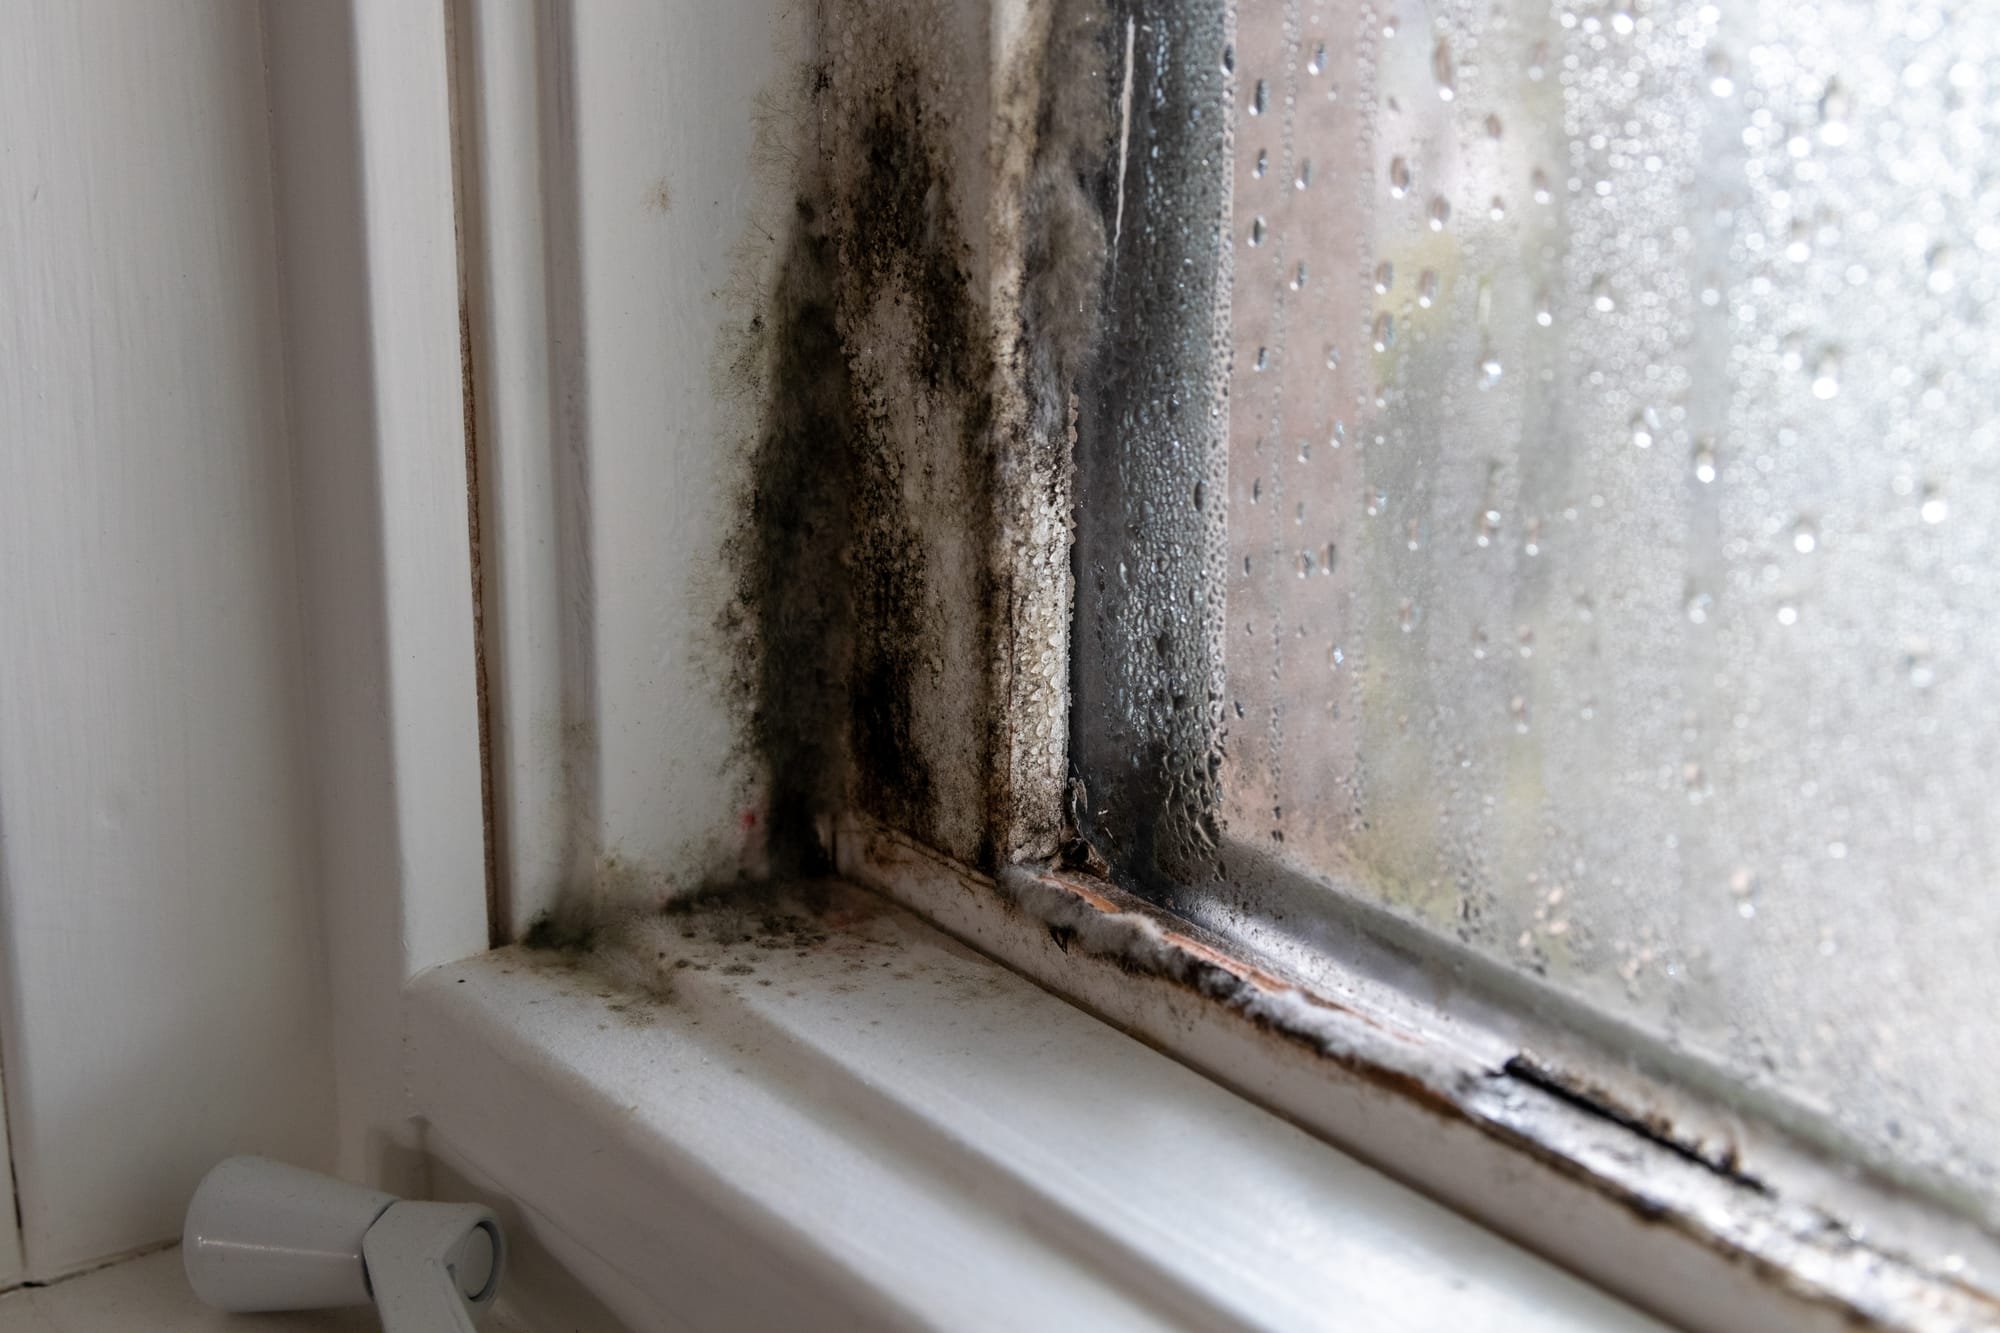 How do I know if my windows need replacing?